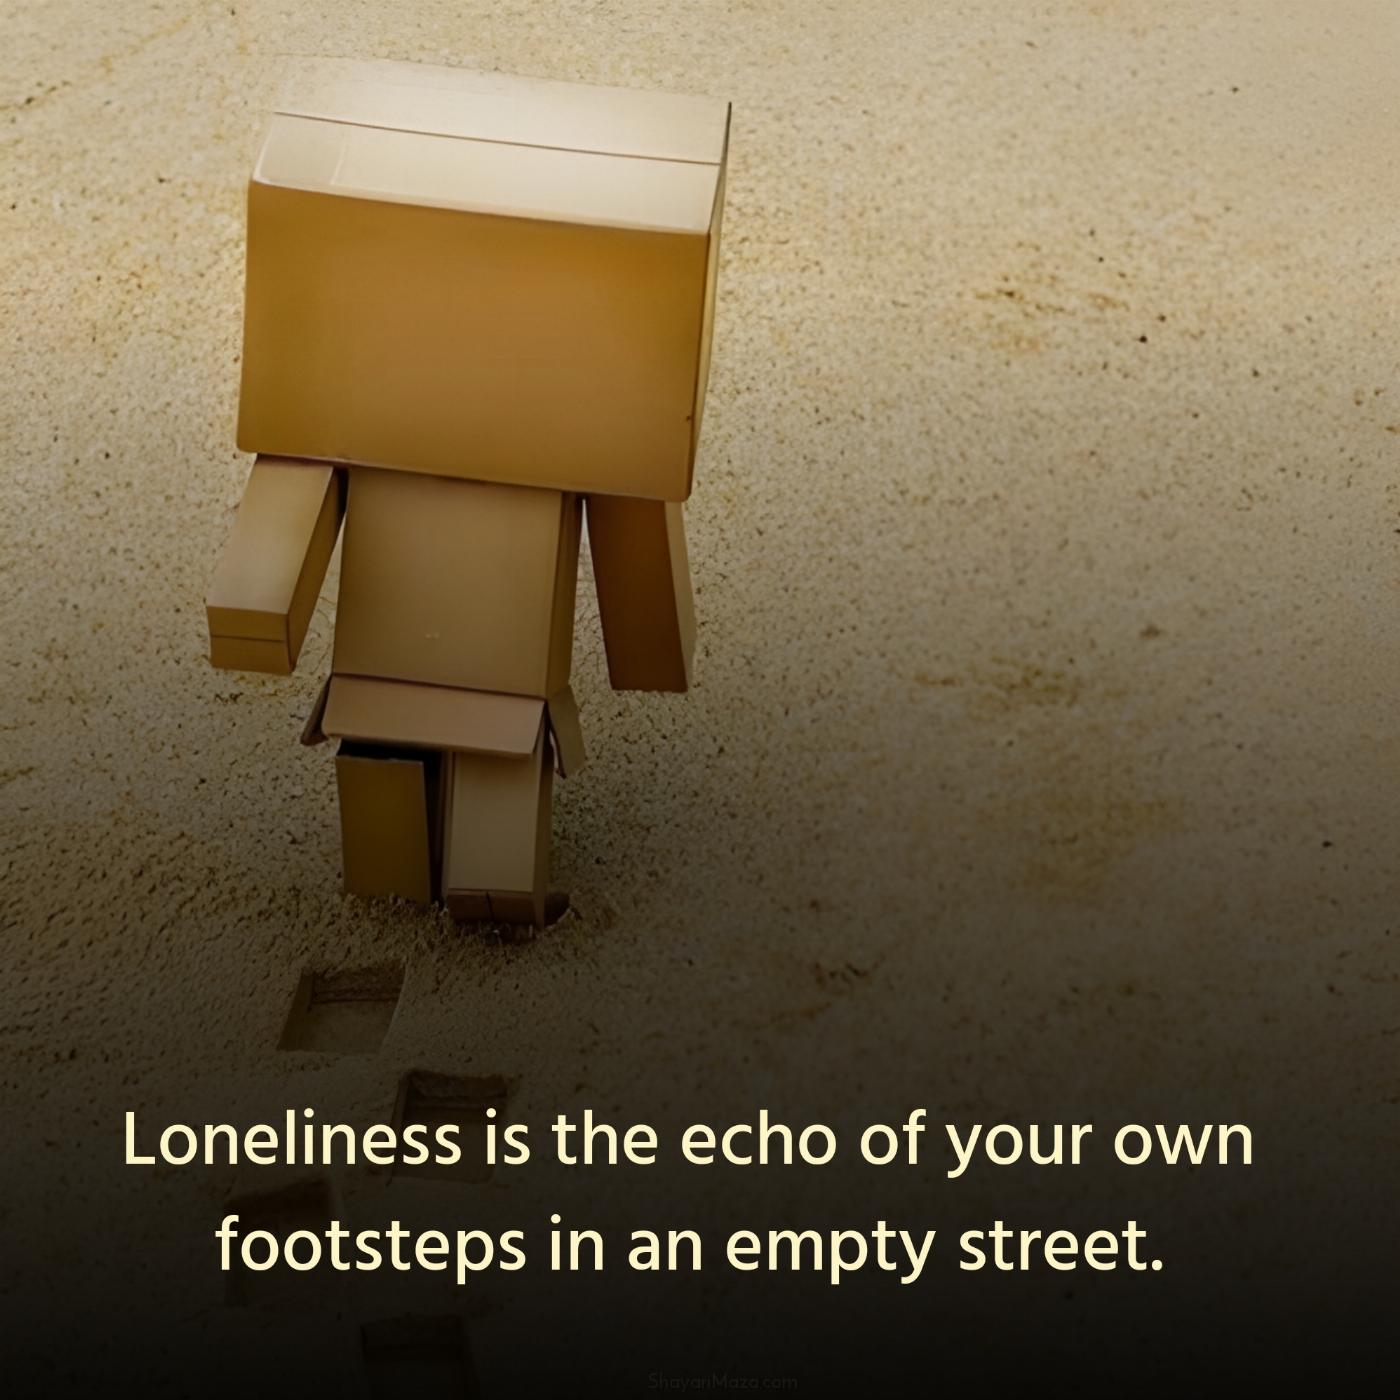 Loneliness is the echo of your own footsteps in an empty street